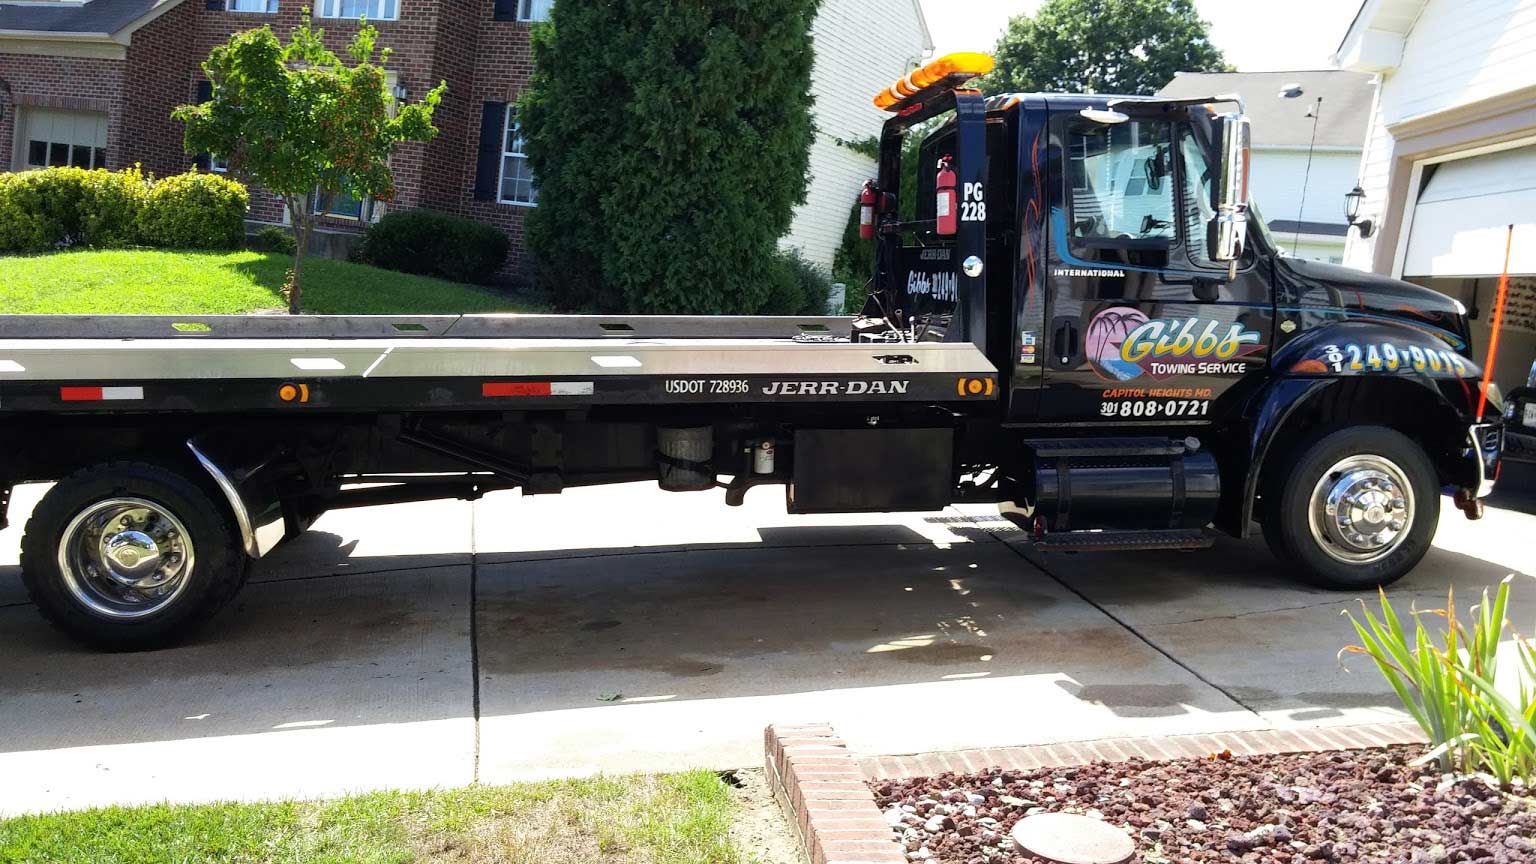 Flatbed Tow Truck — Capitol Heights, MD — Gibbs Towing Service